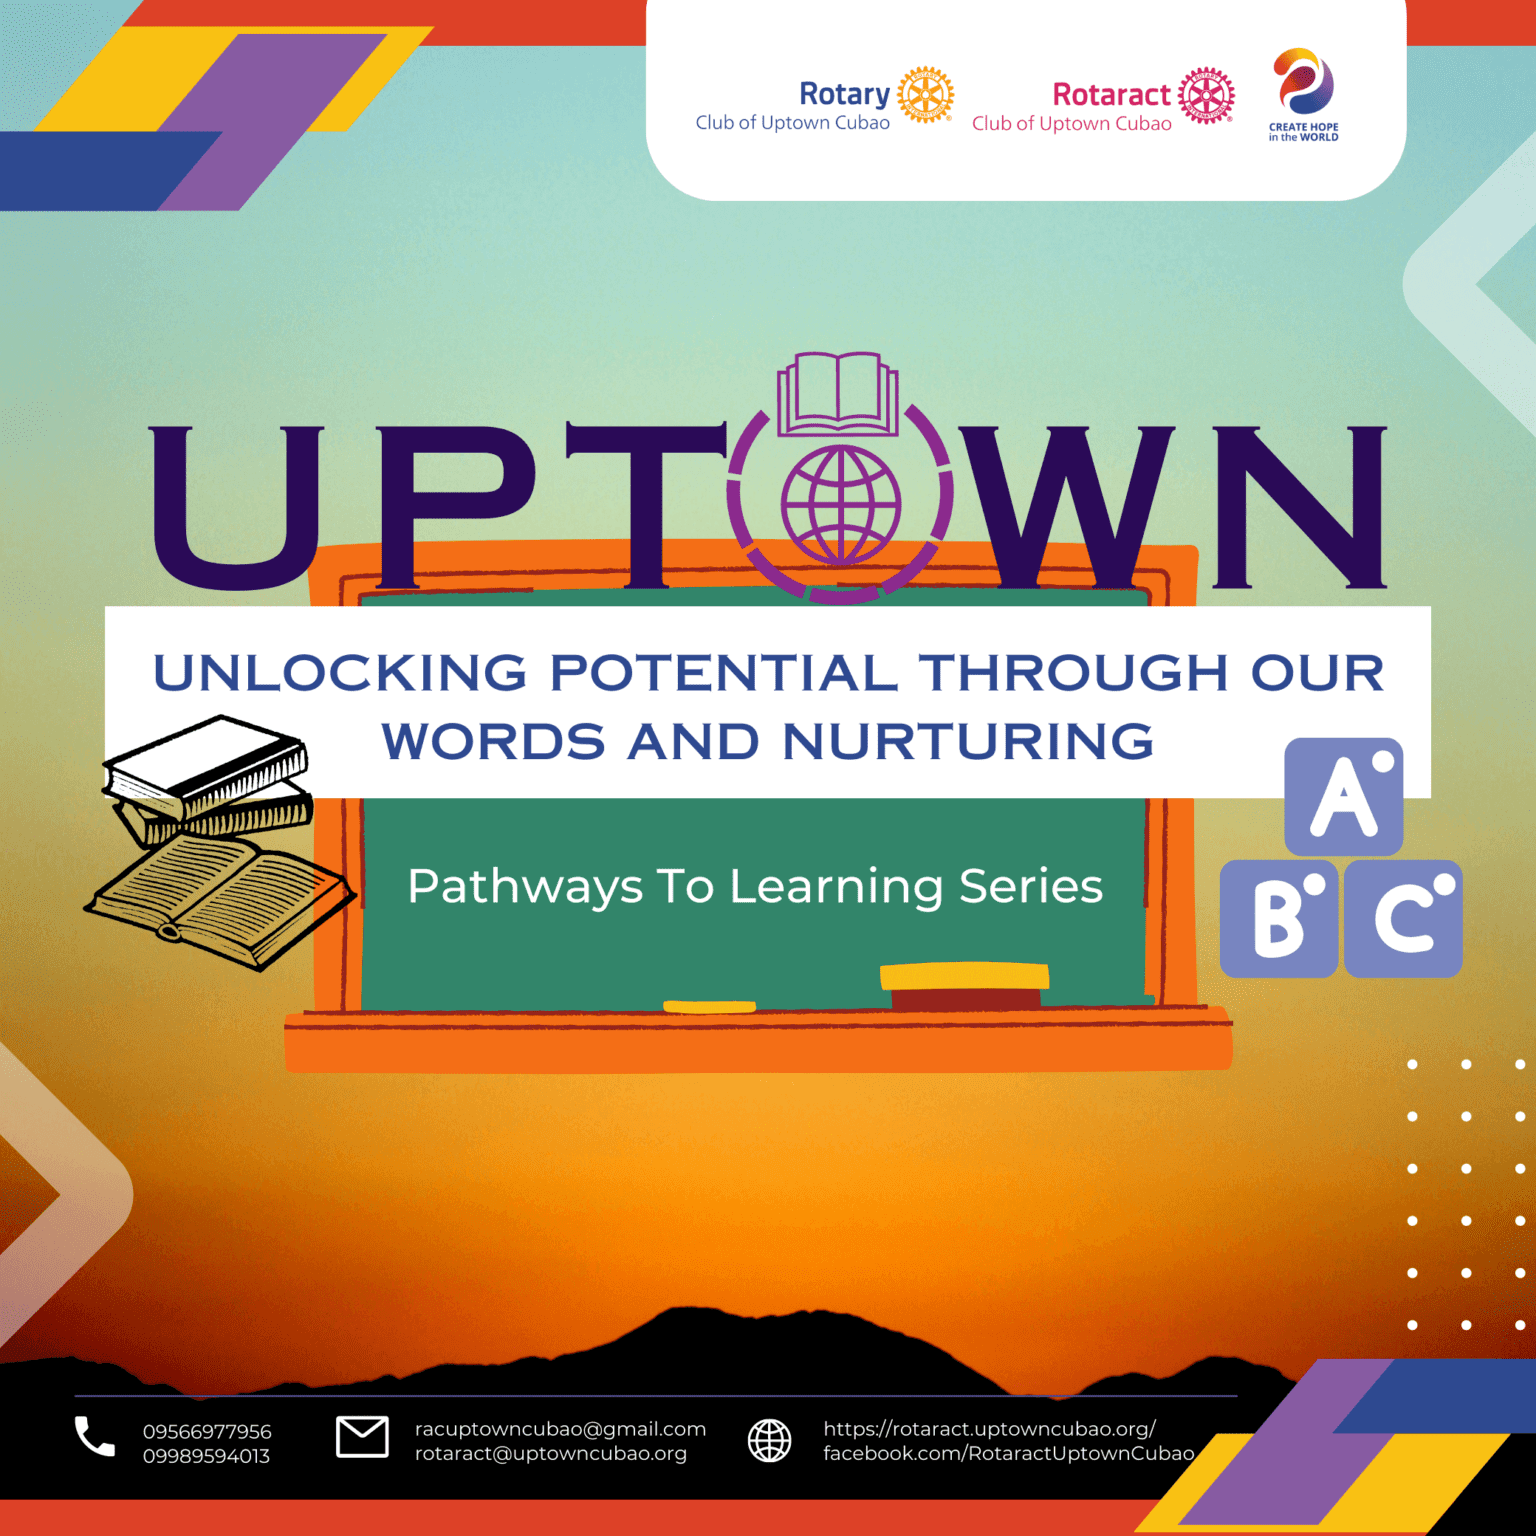 Project UPTOWN Launch: Unlocking Potential Through Our Words and Nurturing